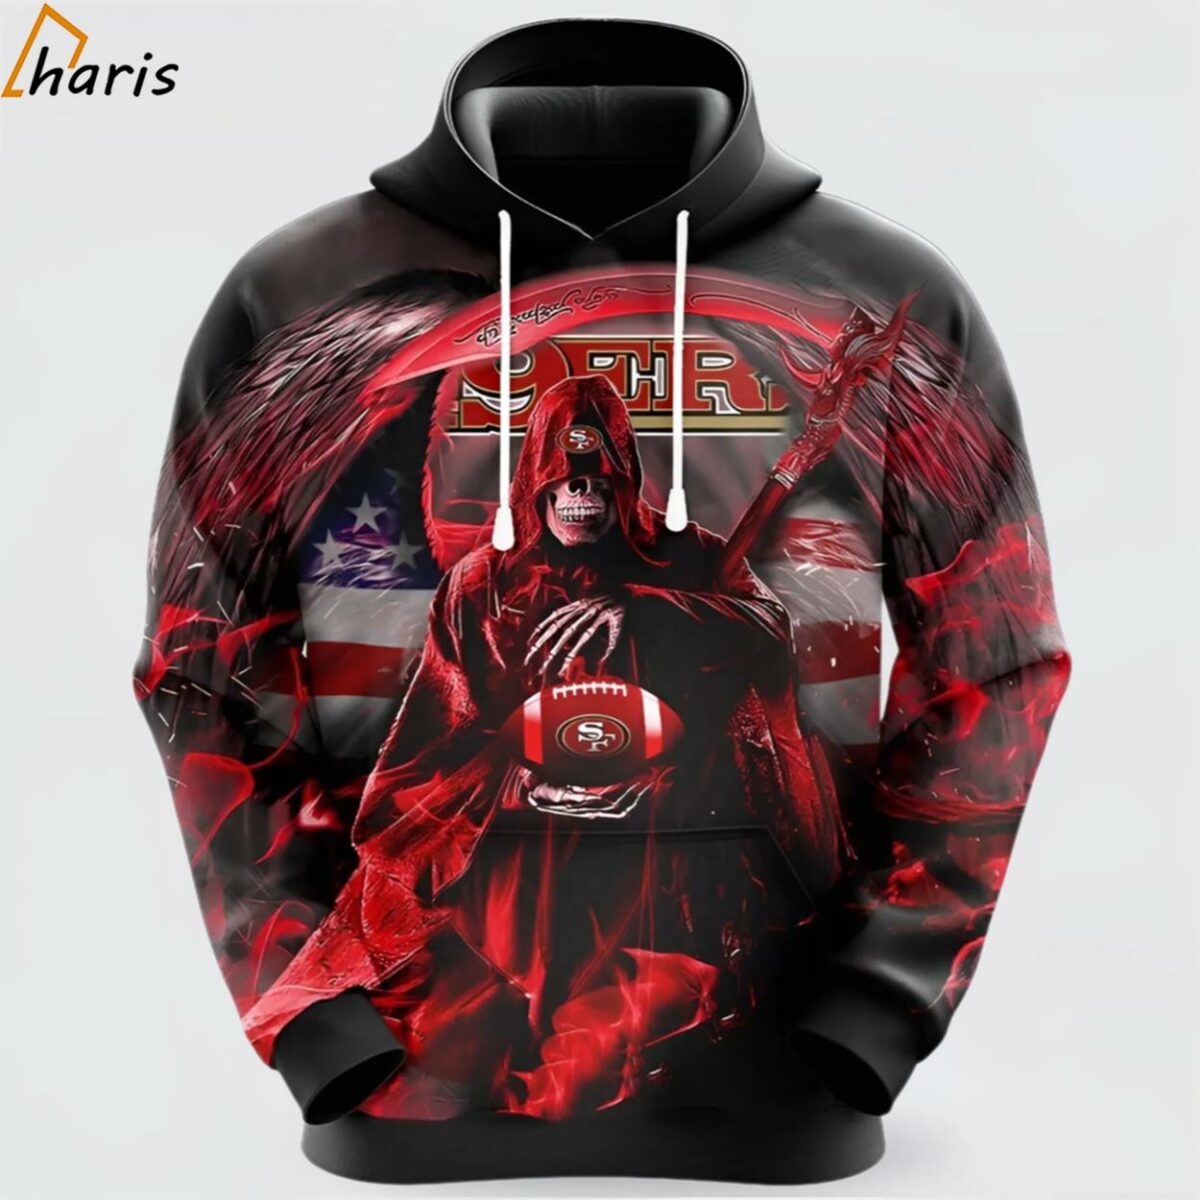 NFL San Francisco 49ers Skull Up For Victory 3D Hoodie 1 jersey